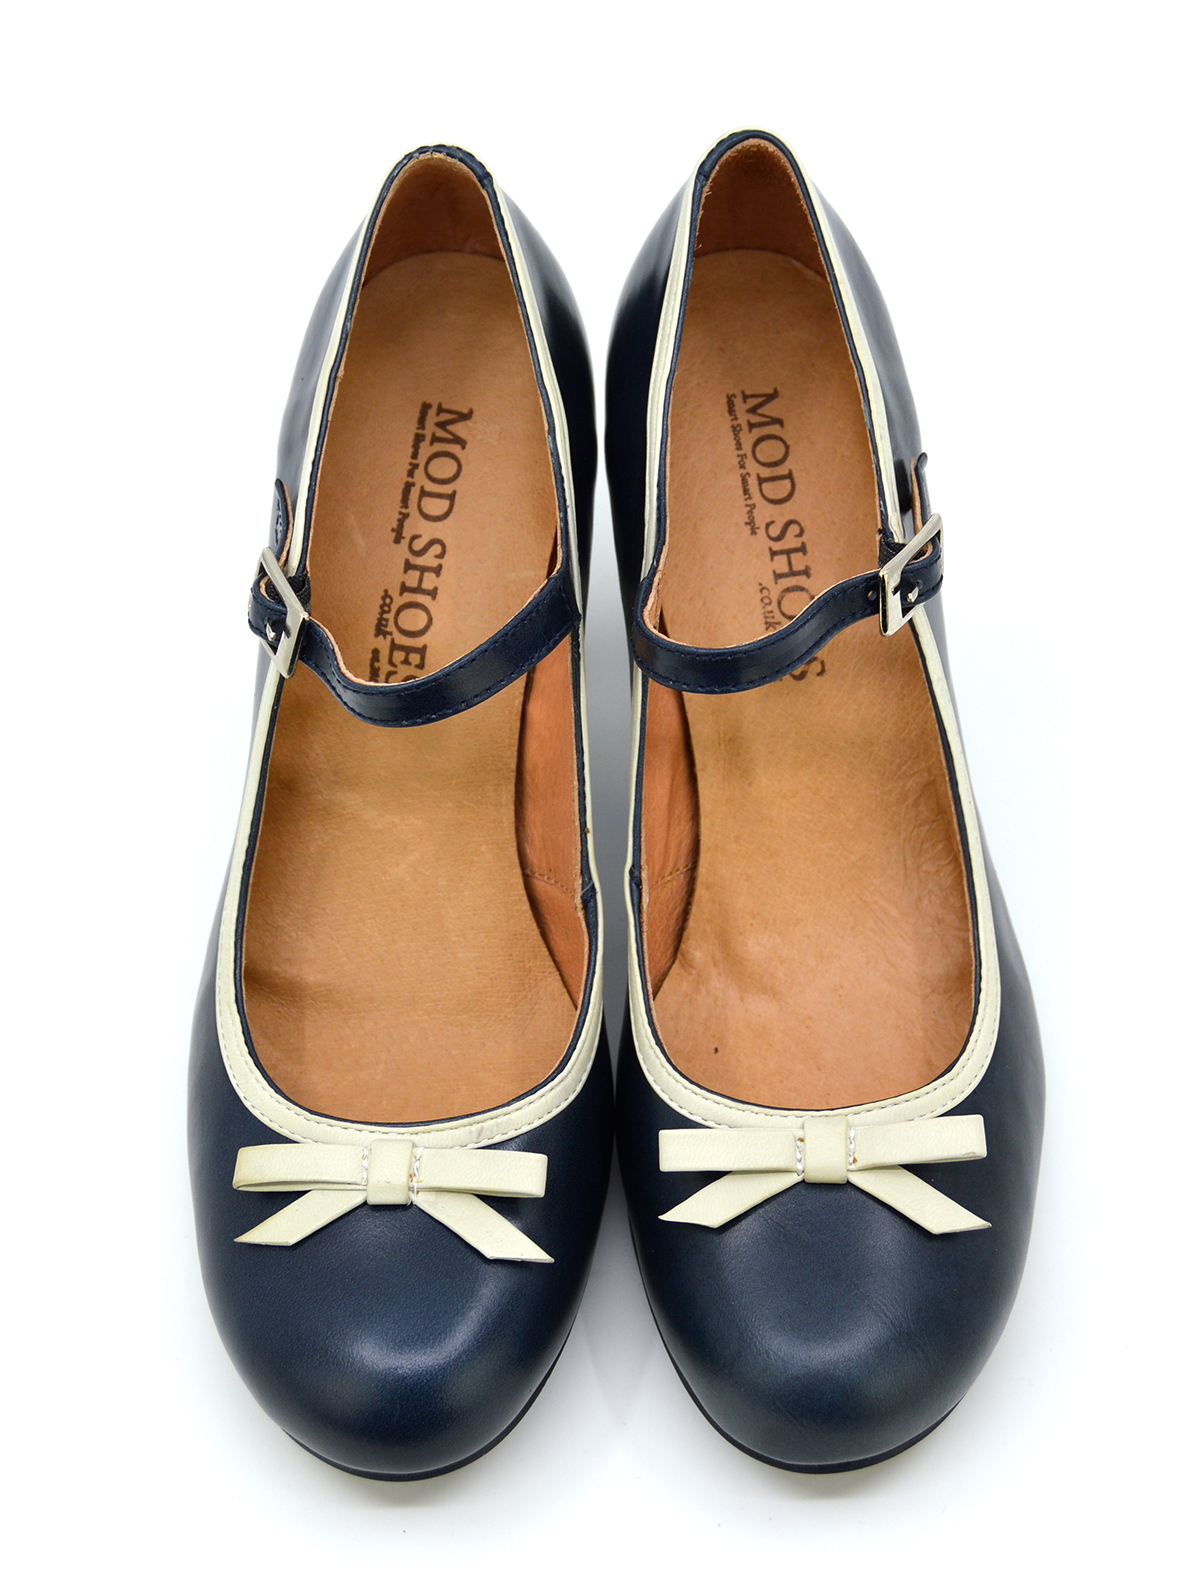 navy and cream shoes uk